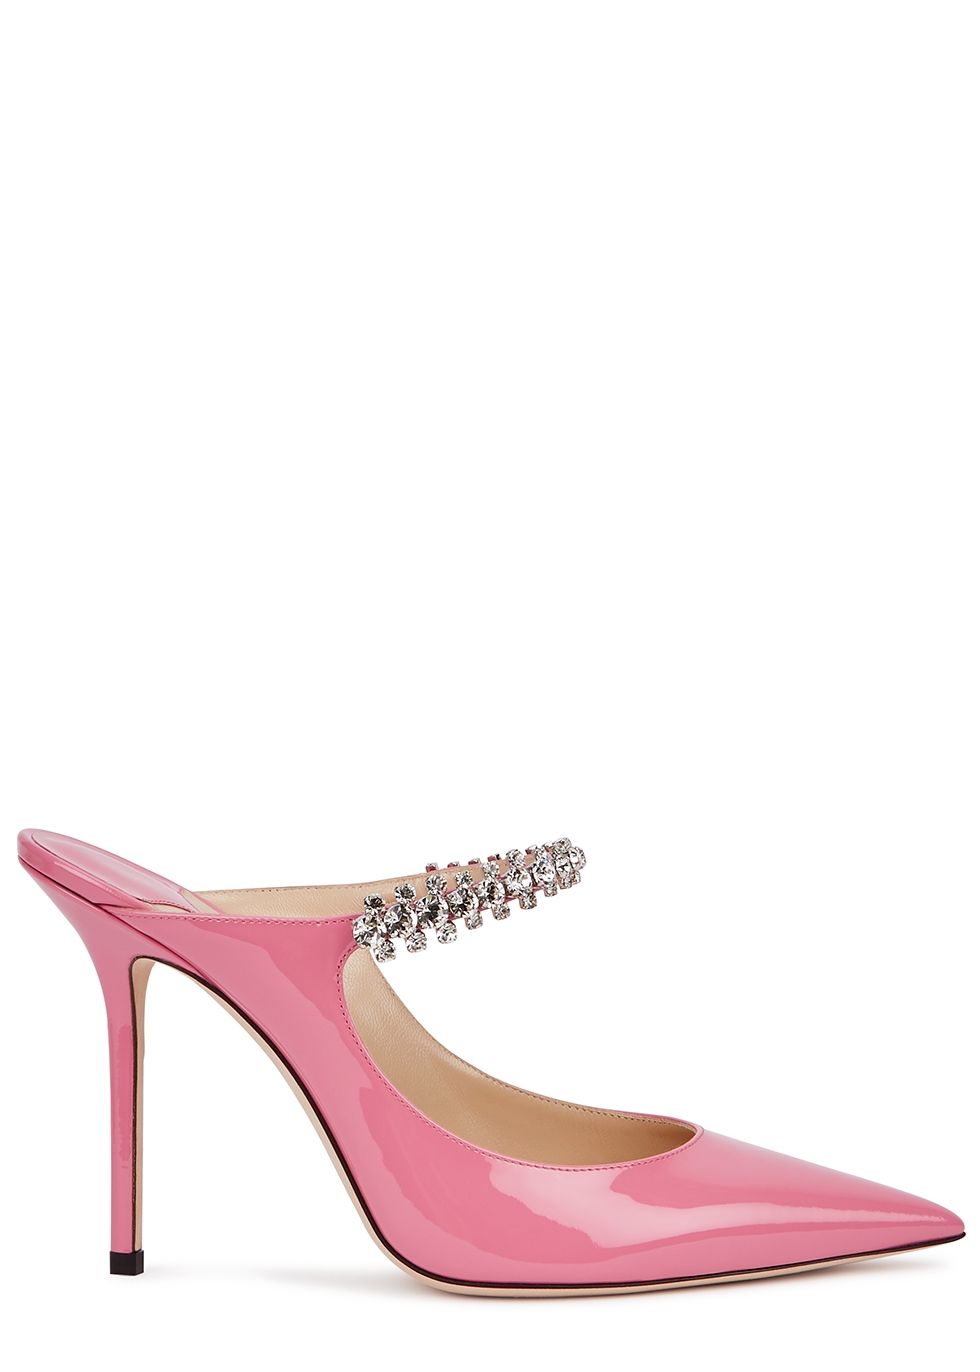 Bing 100 pink embellished patent leather mules